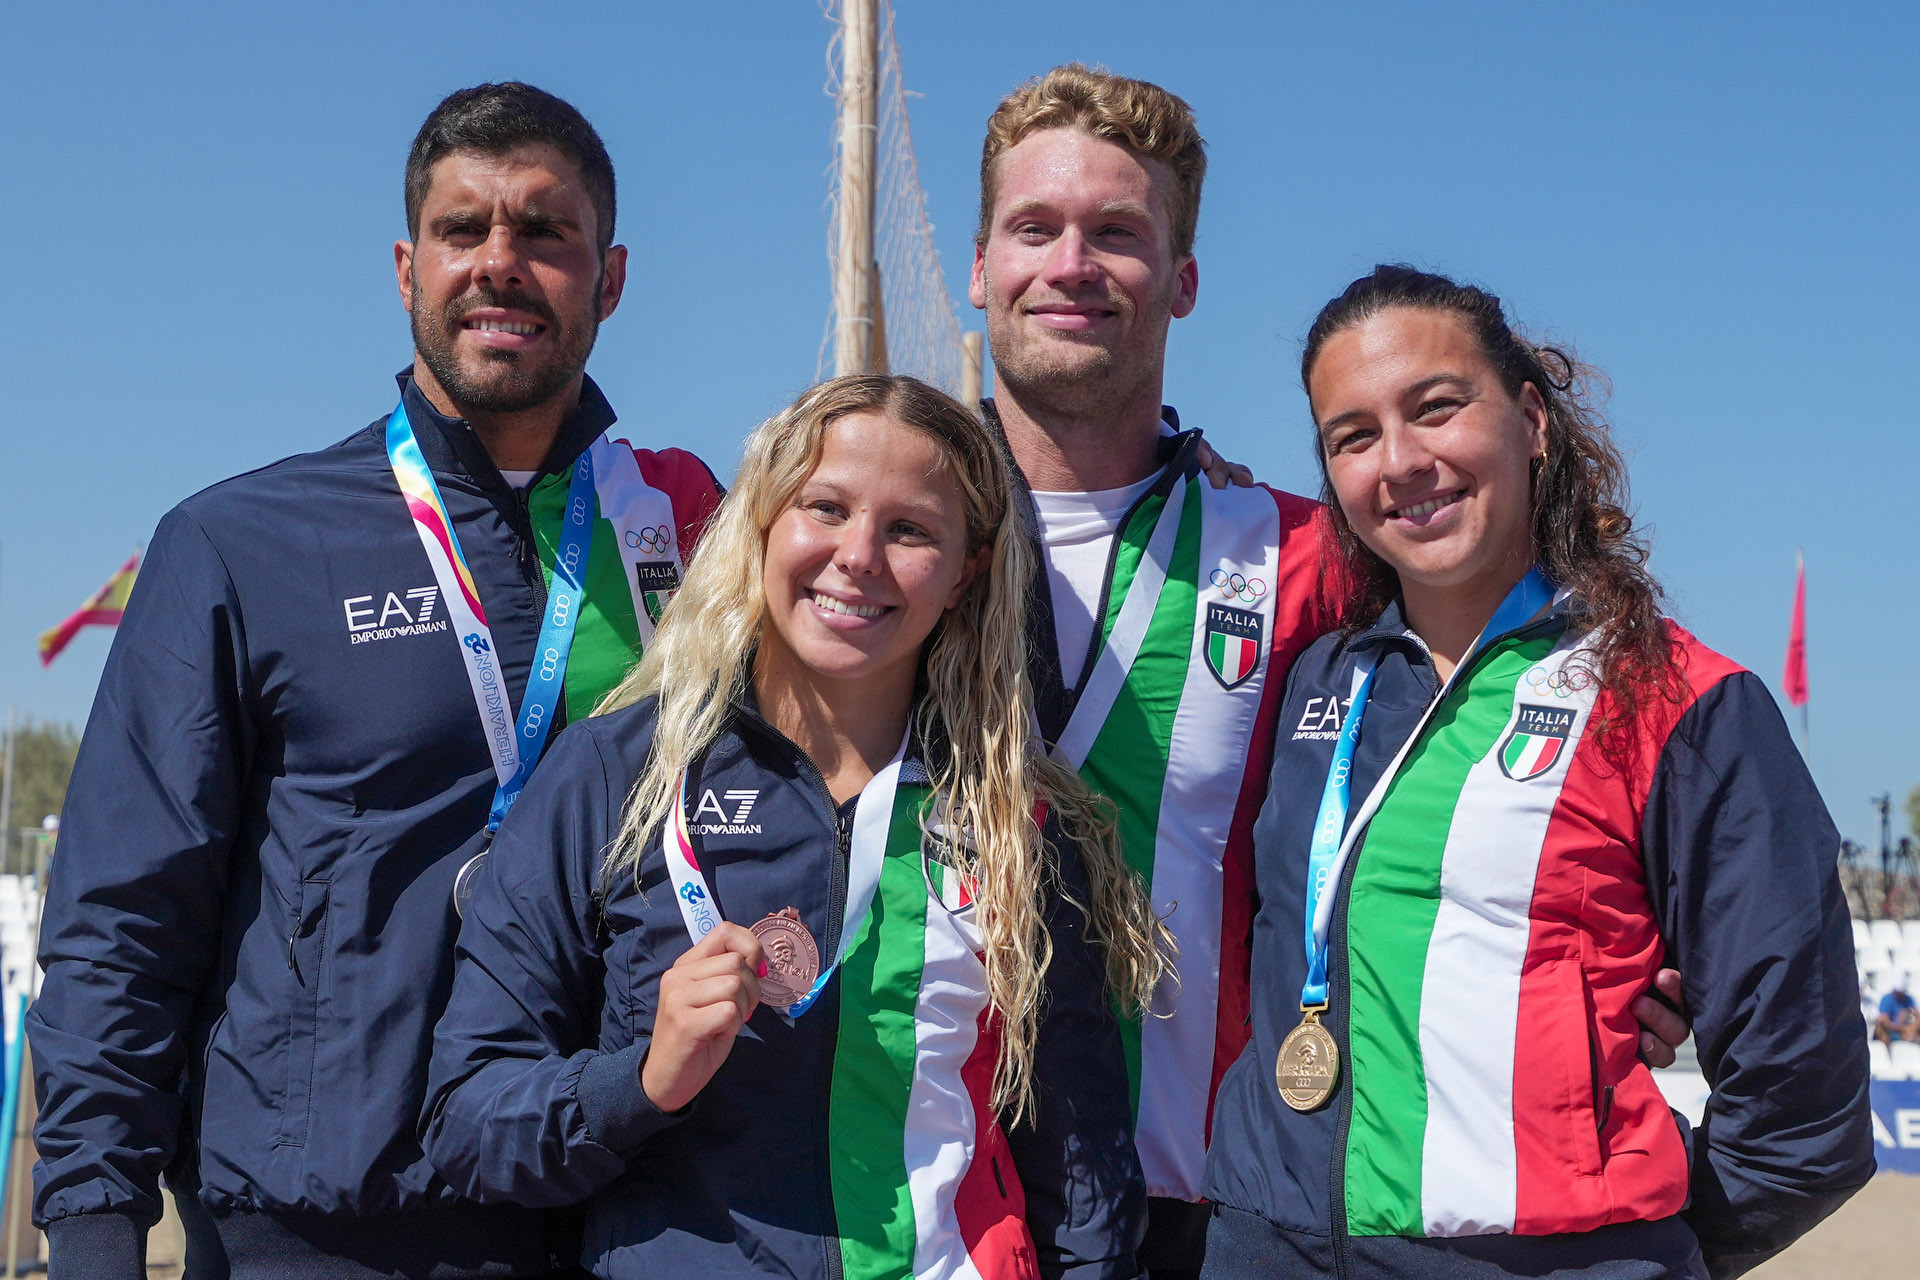 Italy won both open water swimming gold medals of the Mediterranean Beach Games ©CIJM